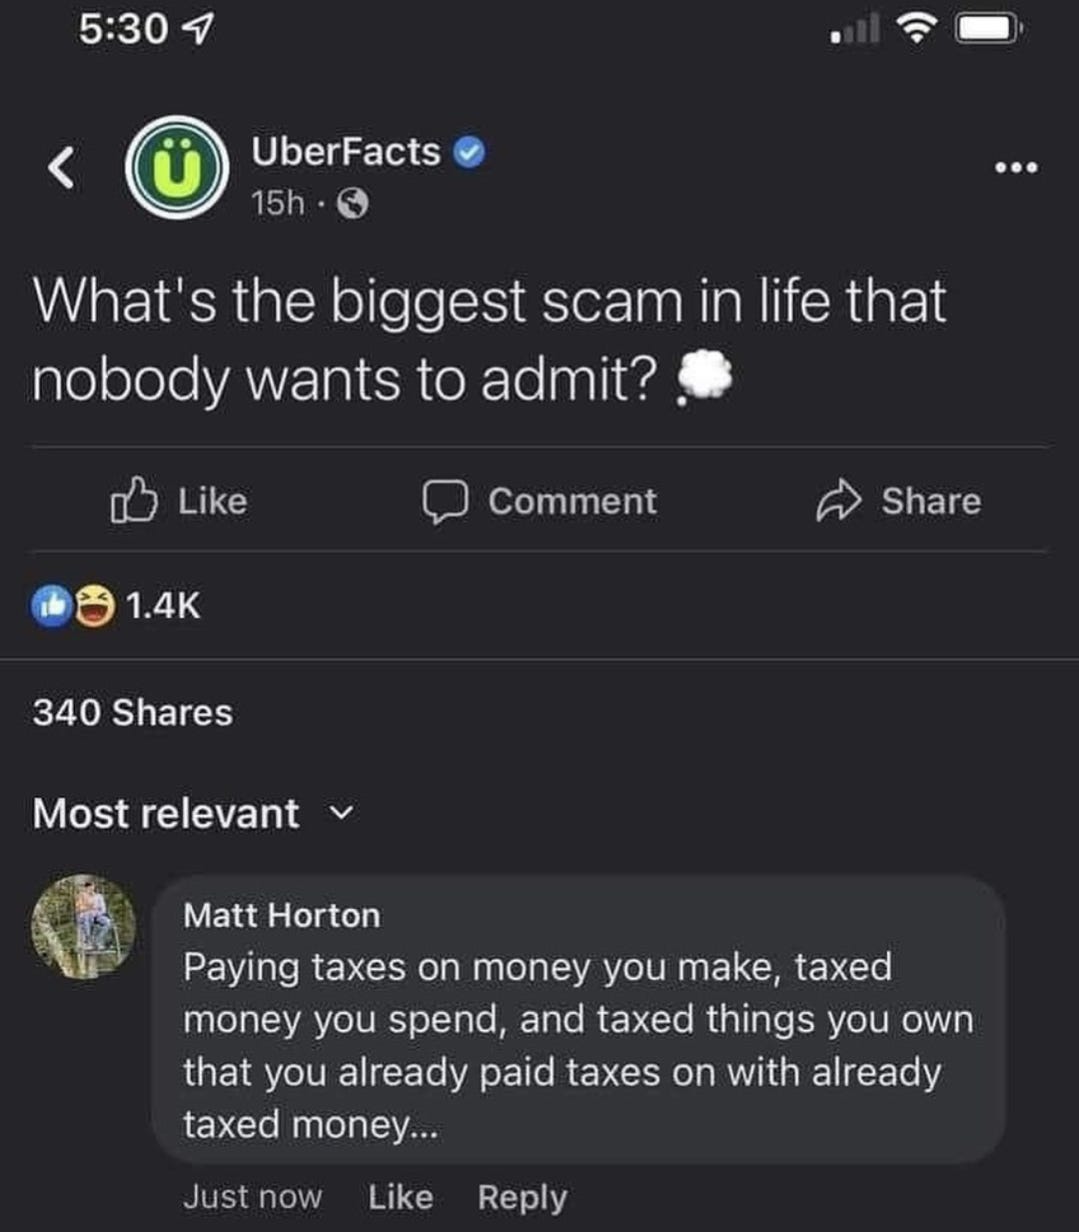 May be a Twitter screenshot of text that says '5:30 Ü UberFacts 15h What's the biggest scam in life that that nobody wants to admit? Like Comment 1.4K Share 340 Shares Most relevant Matt Horton Paying taxes on money you make, taxed money you spend, and taxed things you own that you already paid taxes on with already taxed money... Just now Like Reply'